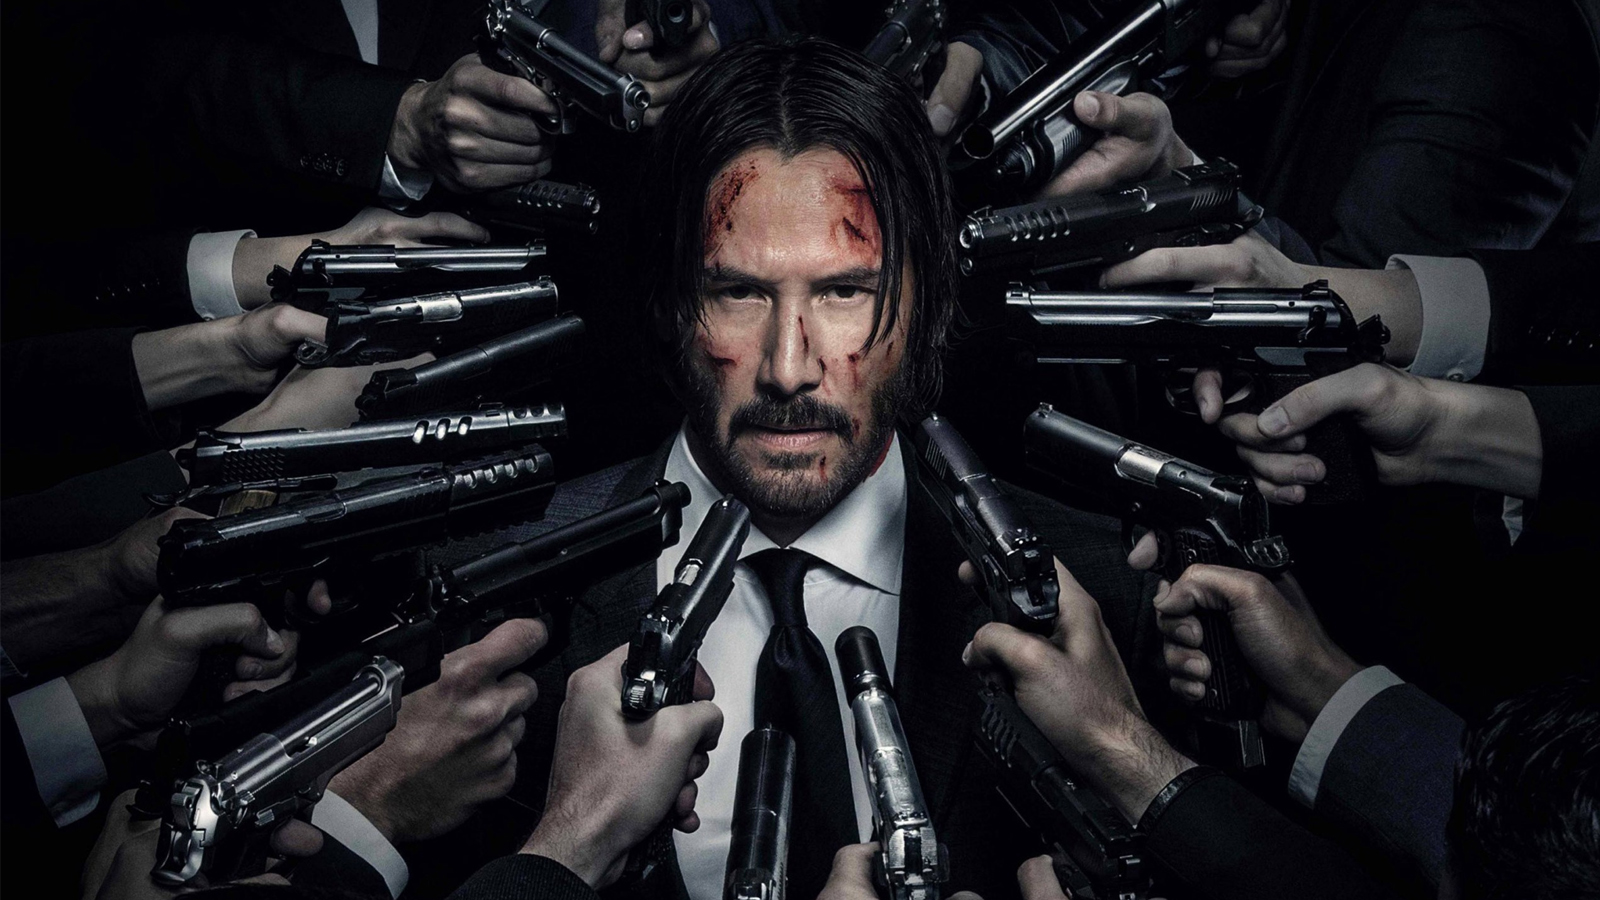 Keanu Reeves Personally Came Up With Some Of John Wick 4’s Best Action Scenes